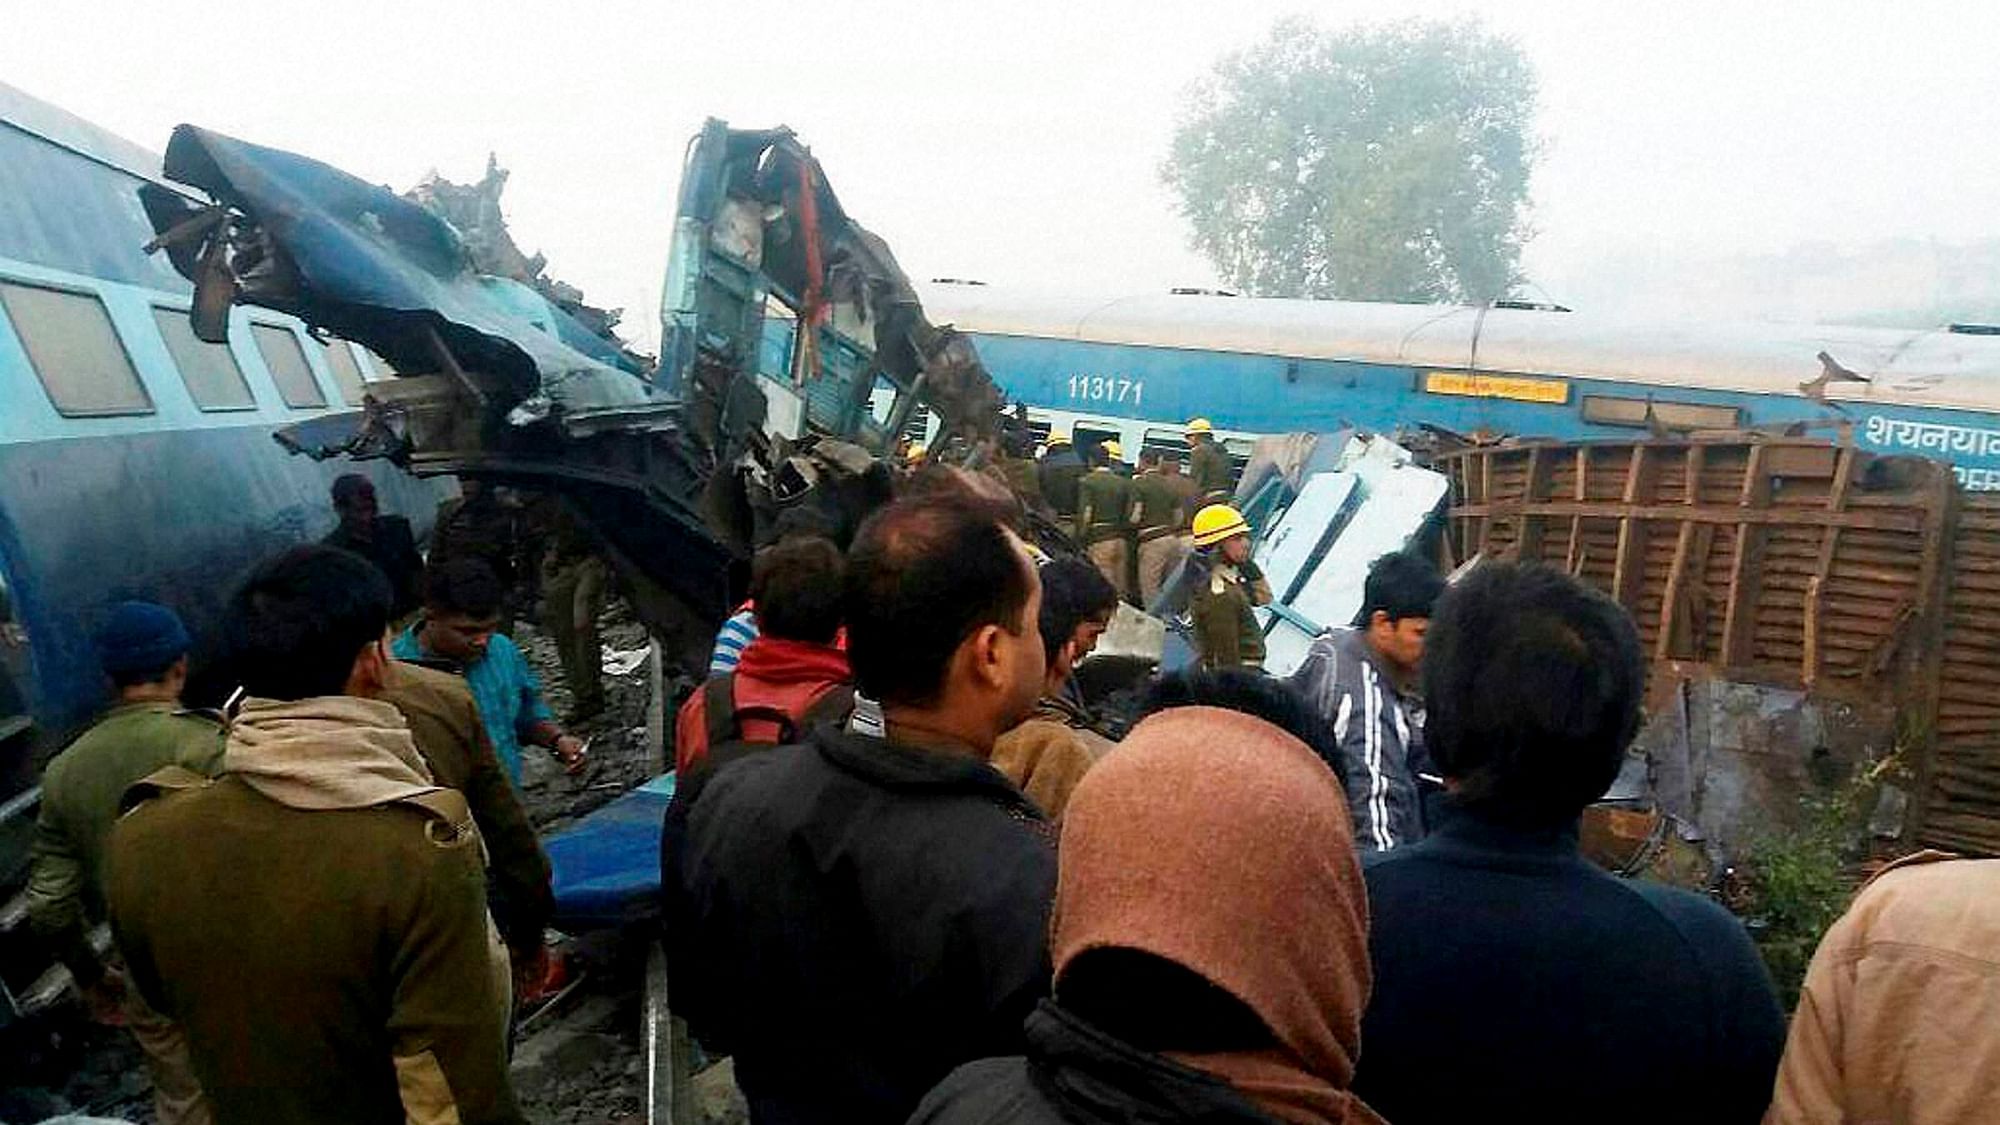 The accident killed at least 150 people. (Photo: PTI)